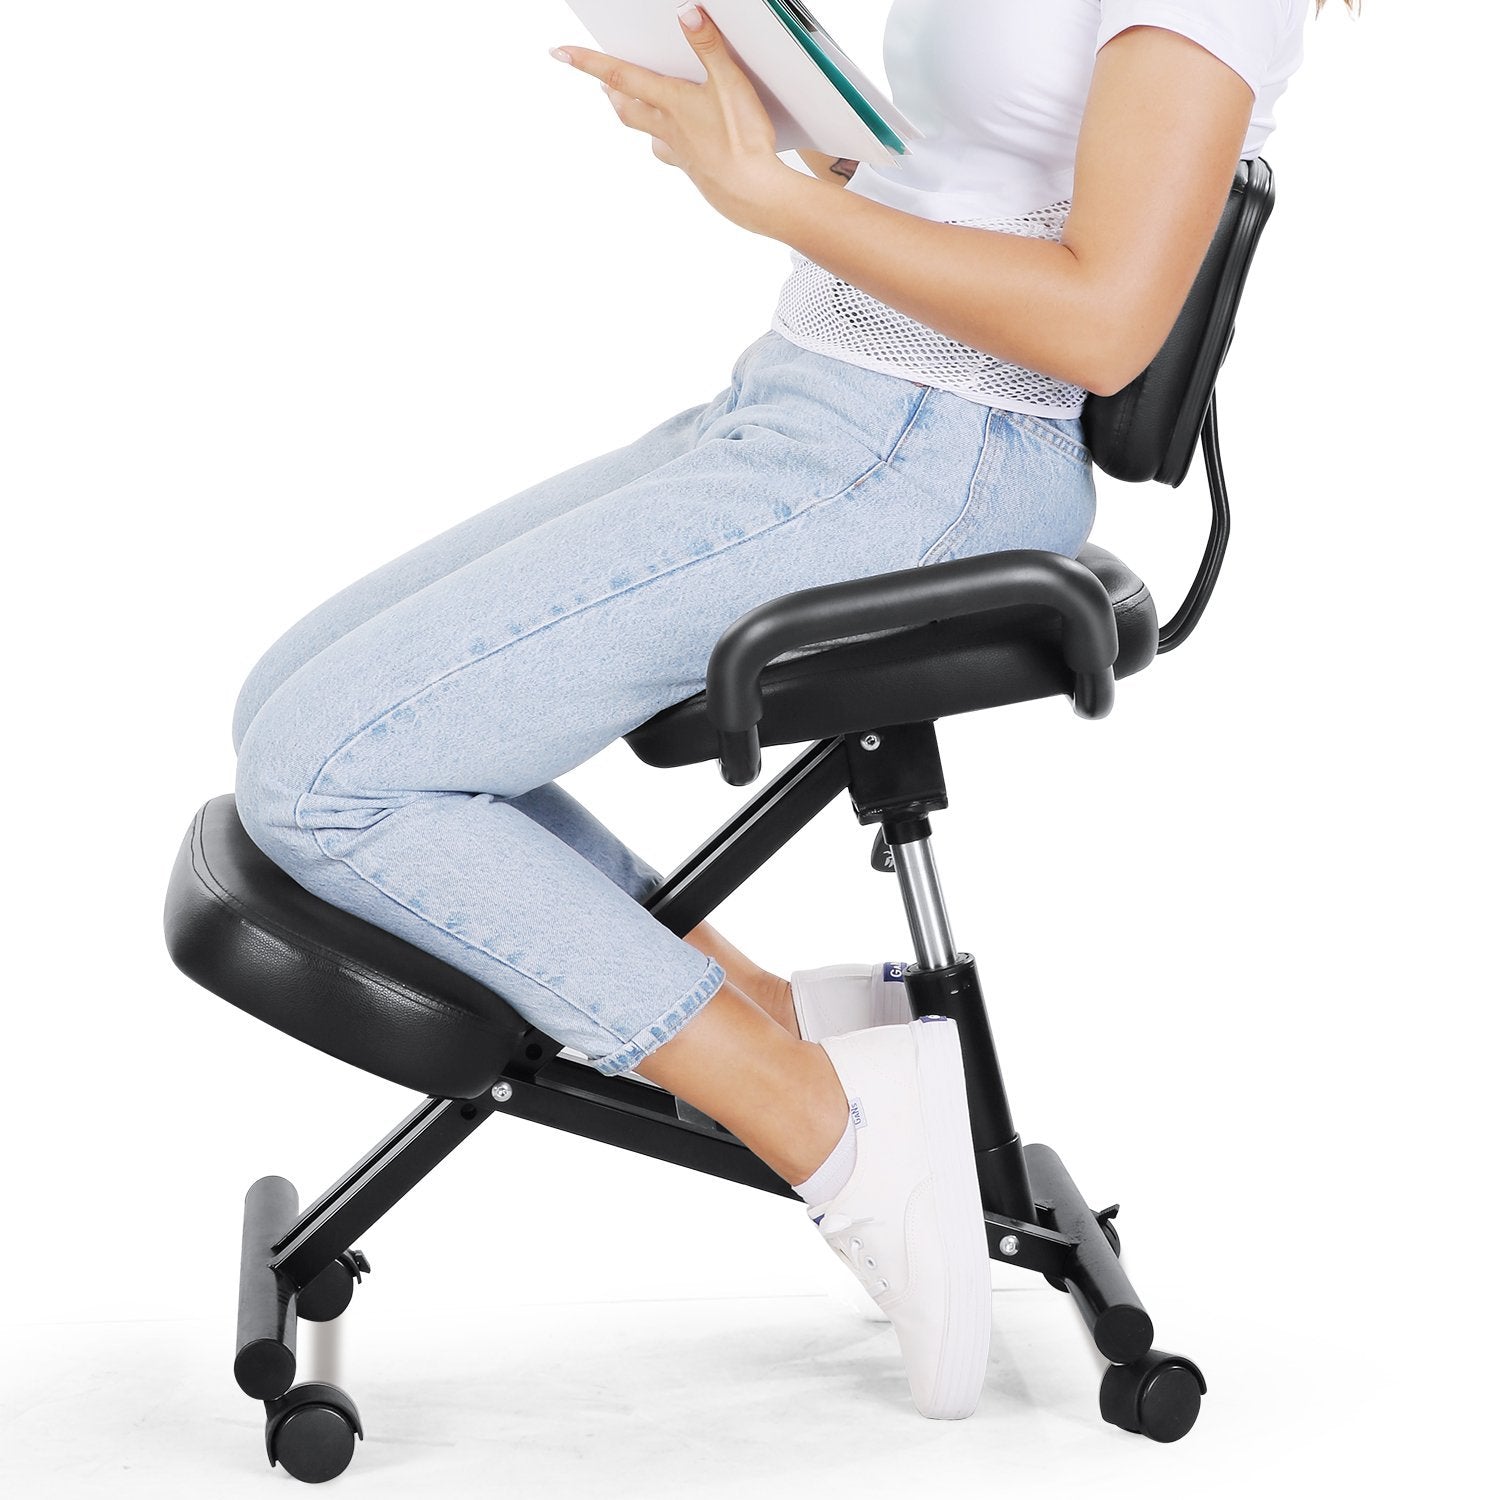 http://www.marnur.net/cdn/shop/products/maxkare-ergonomic-kneeling-chair-office-home-chair-with-adjustable-height-for-posture-correct-bad-backs-neck-pain-relieving-spine-tension-relief-thick-comfortab-276452.jpg?v=1626766978